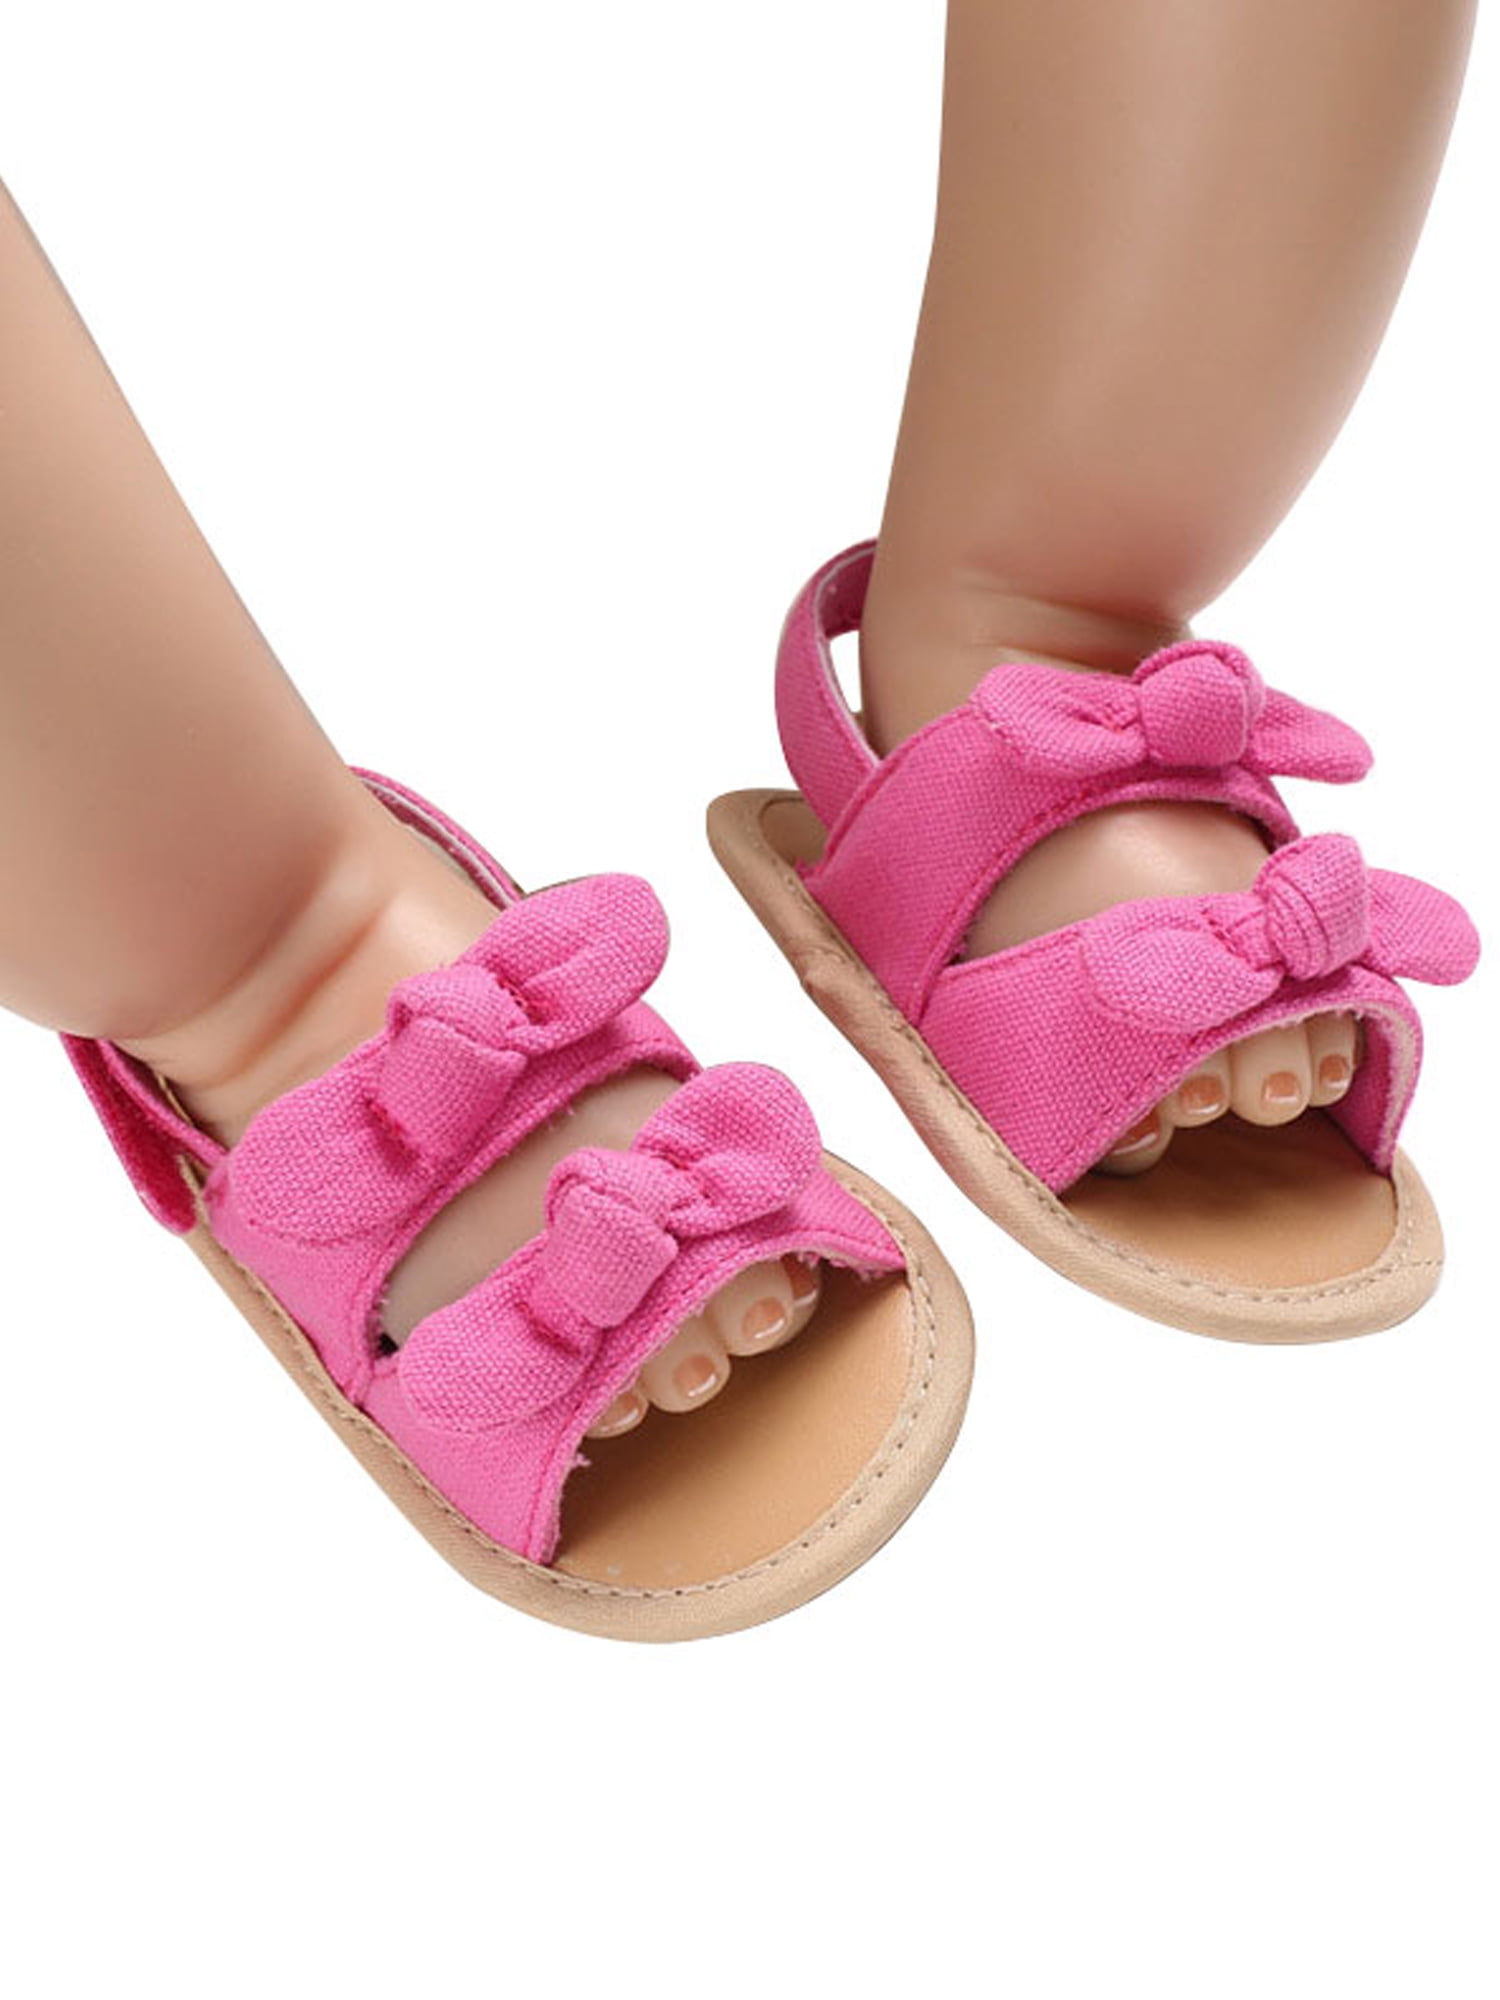 Toddler Little Kid Girl Soft Sole Crib Outdoor Shoes Summer Sandals Size 10-4 